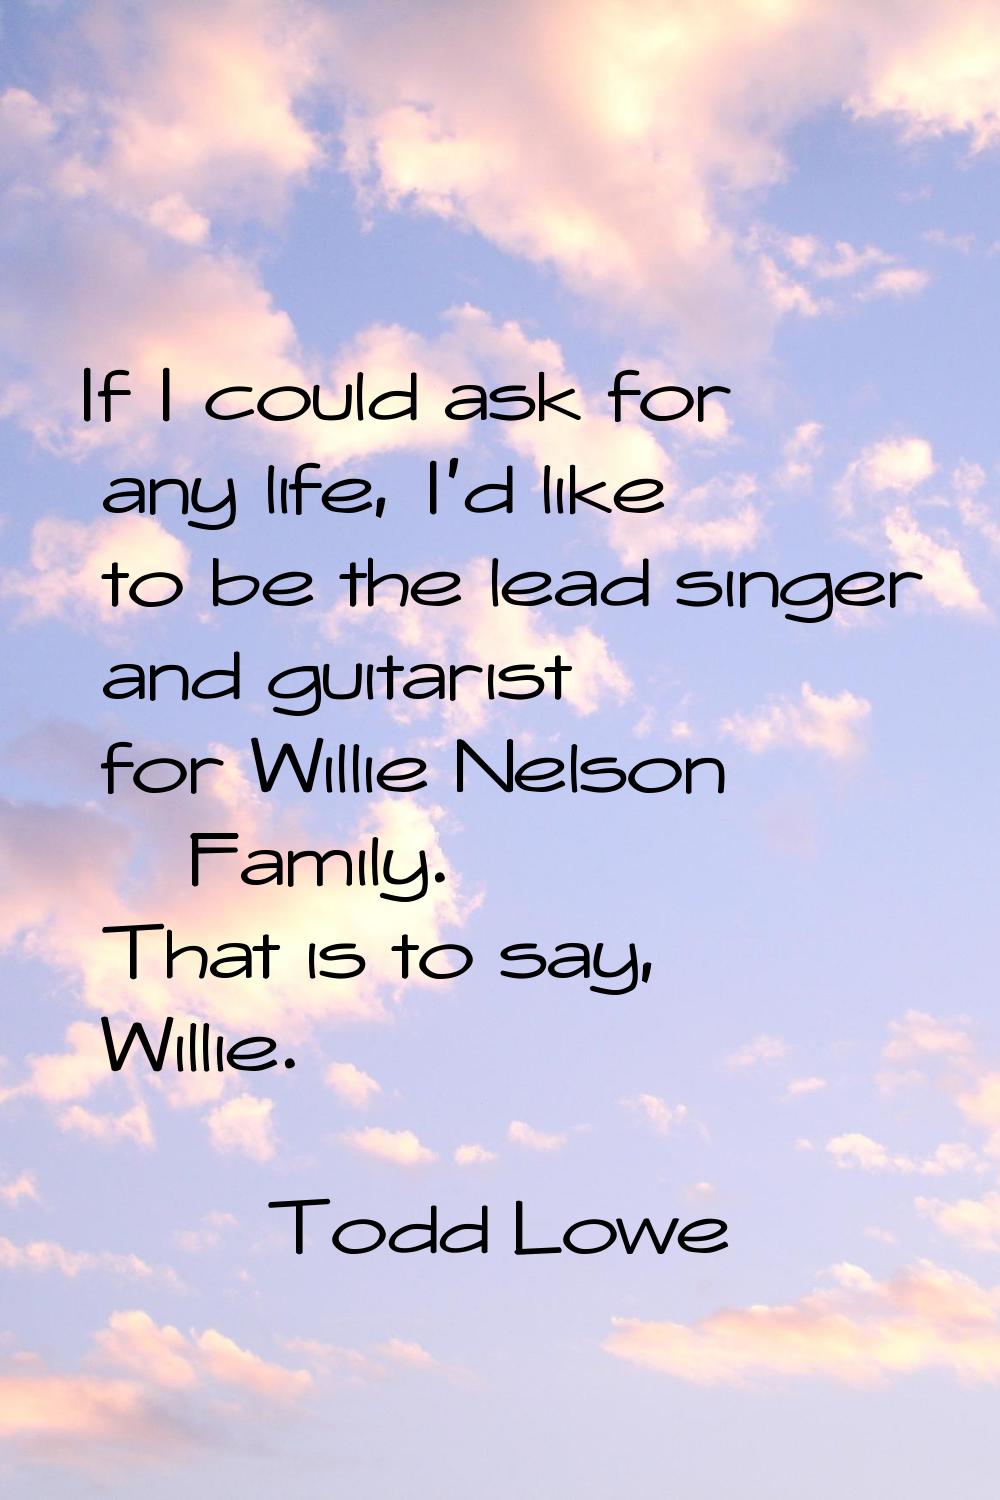 If I could ask for any life, I'd like to be the lead singer and guitarist for Willie Nelson & Famil